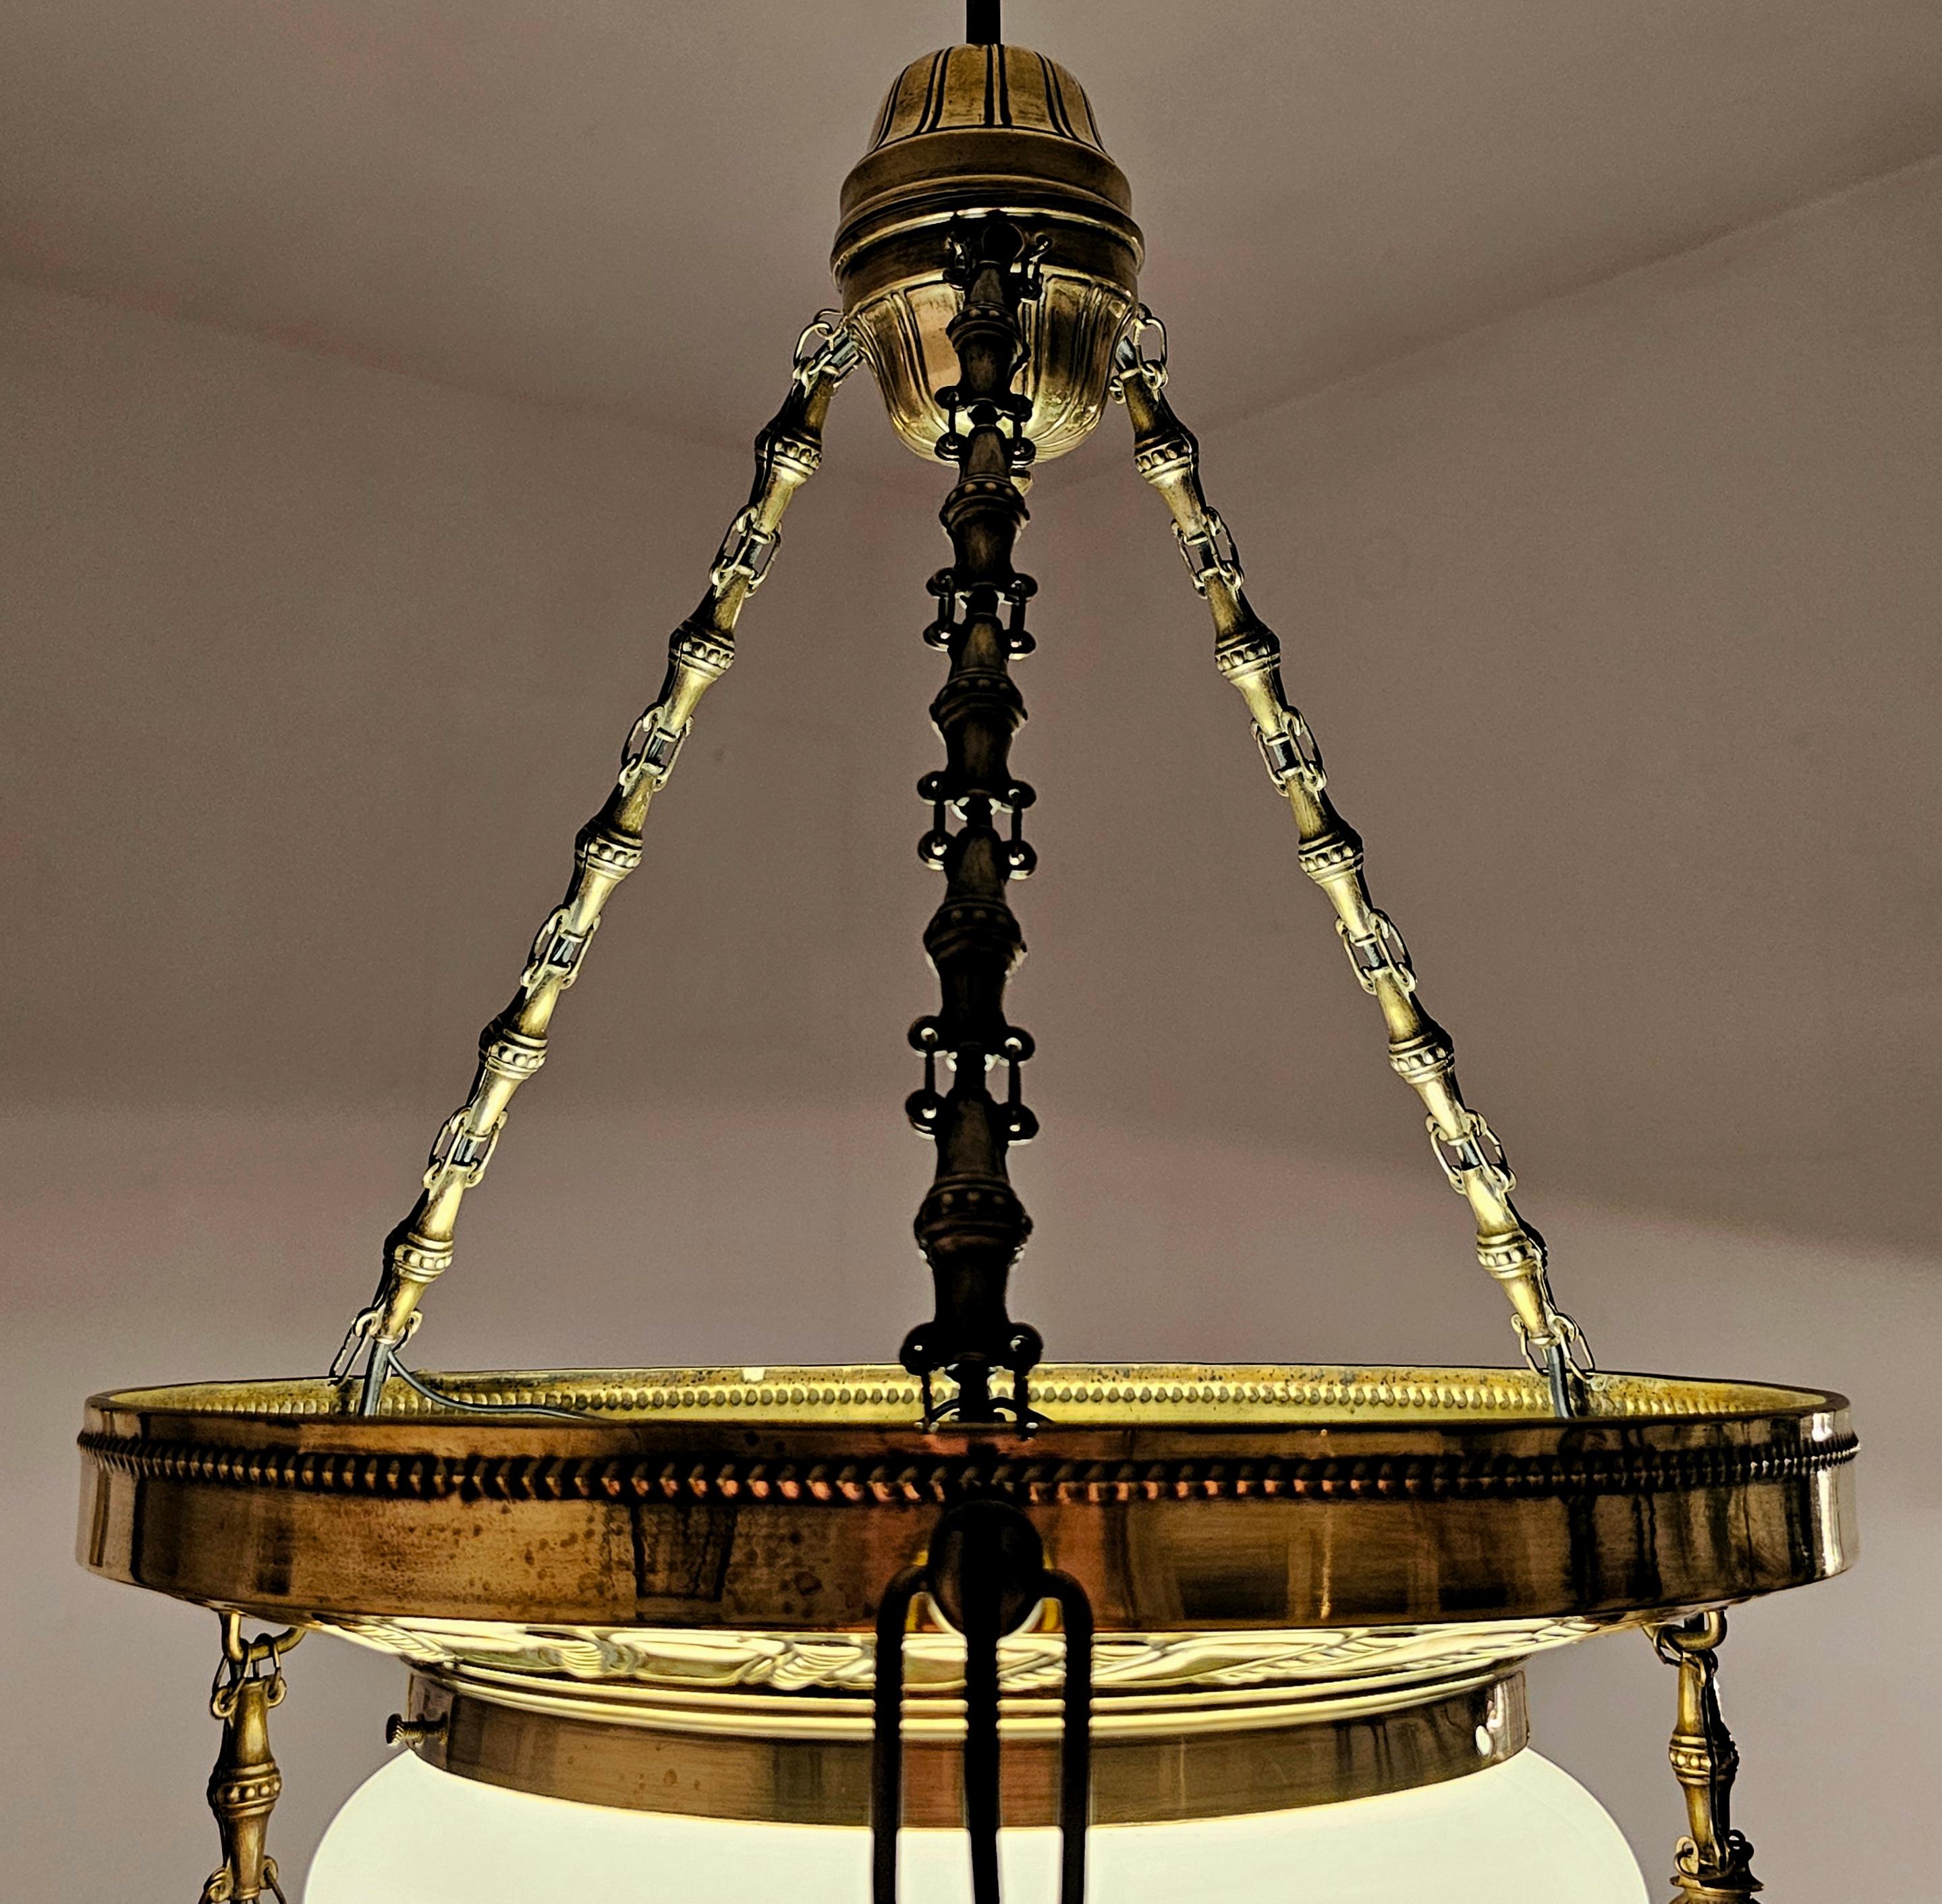 In this listing you will find a gorgeous Art Nouveau or Vienna Secession chandelier. It is done in polished brass with beautiful relief and the milk dome in the center. The chandelier features 4 lights, one based in the center underneath the milk